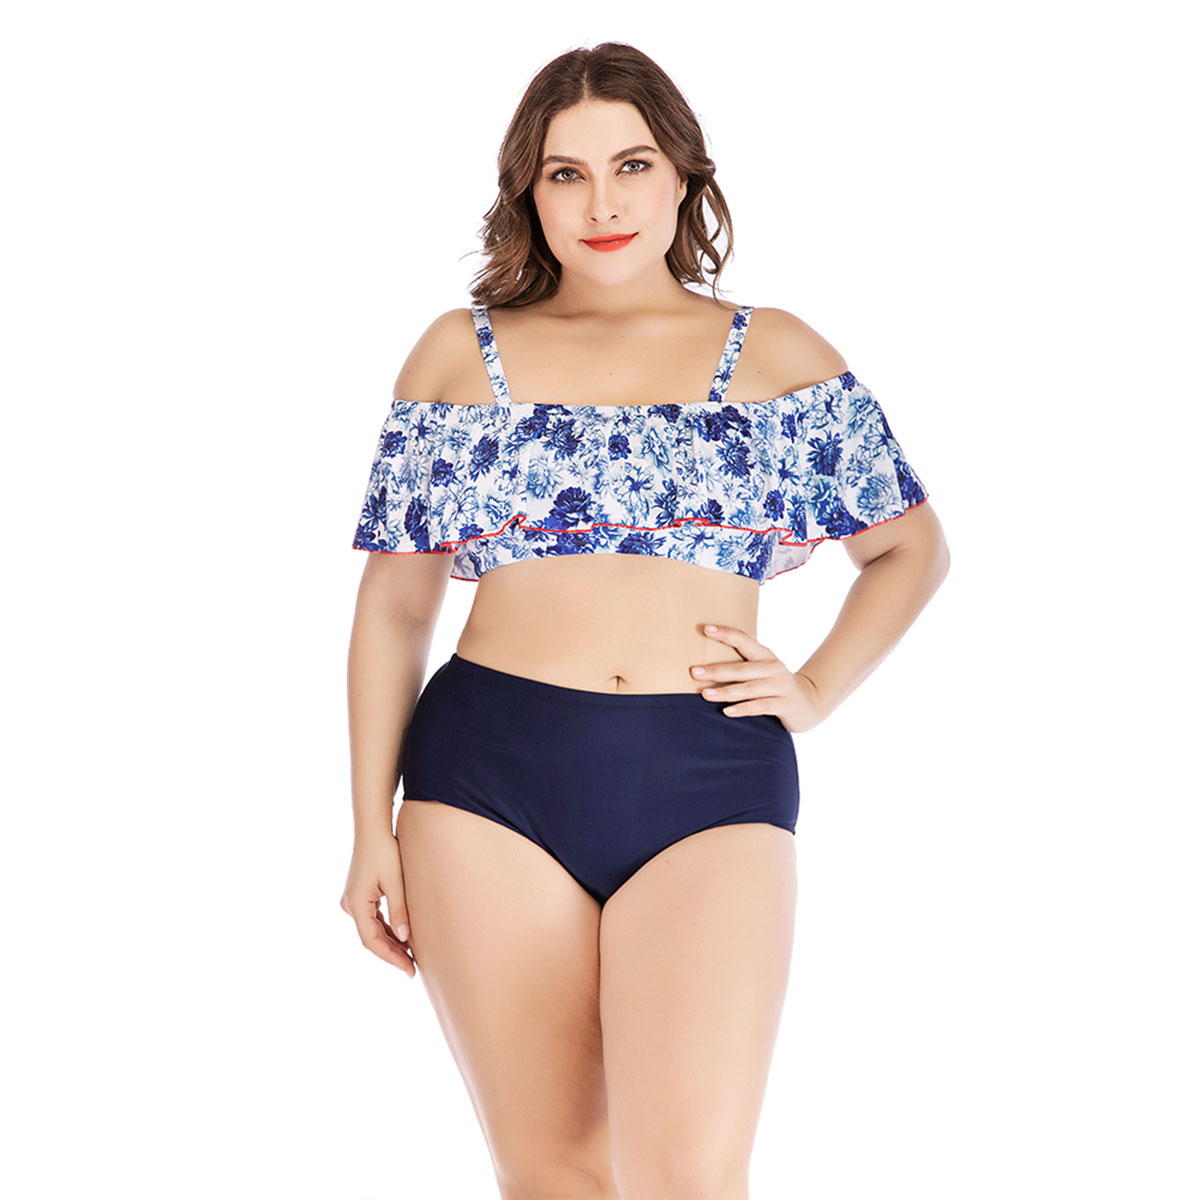 Clearance! Size Swimsuits for Women, 2021 NEW Two Piece Swimsuit Slimming Bikini Set, Tummy Control Swimwear, Ruffle Off Bathing Top with High Waisted Swimsuit Bottom,I6525 - Walmart.com